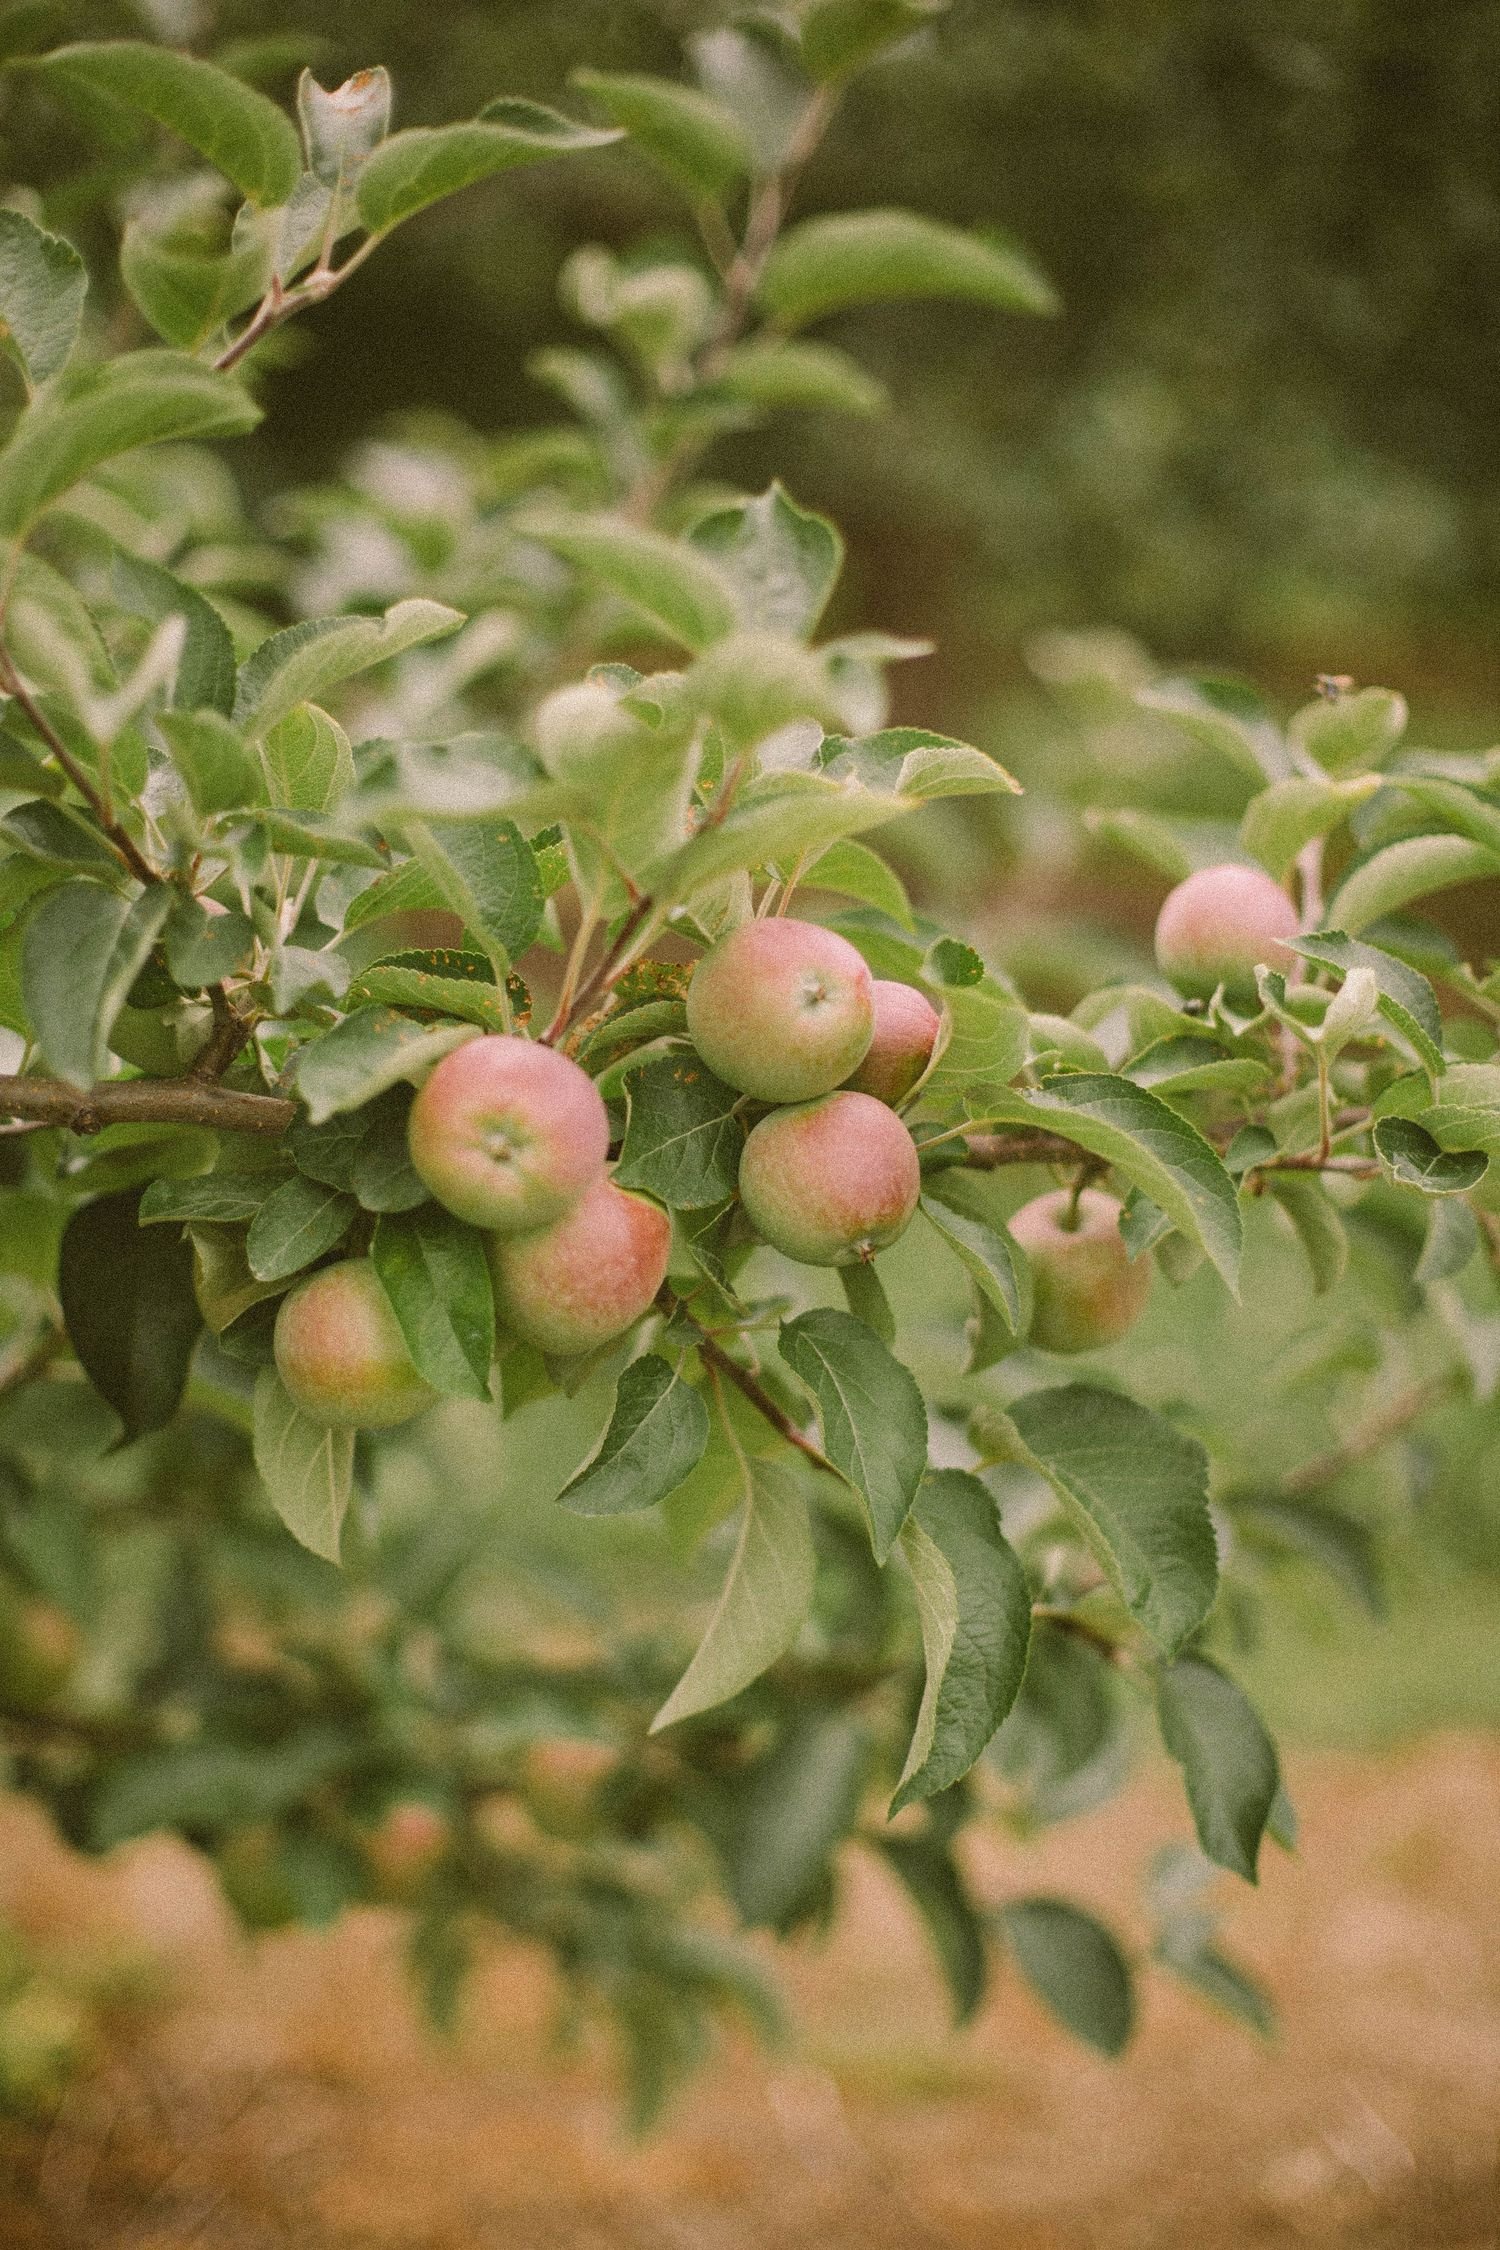 Brantview_Apples_and_Cider_Wedding_Venue_10_of_23-27a1abd5.jpg